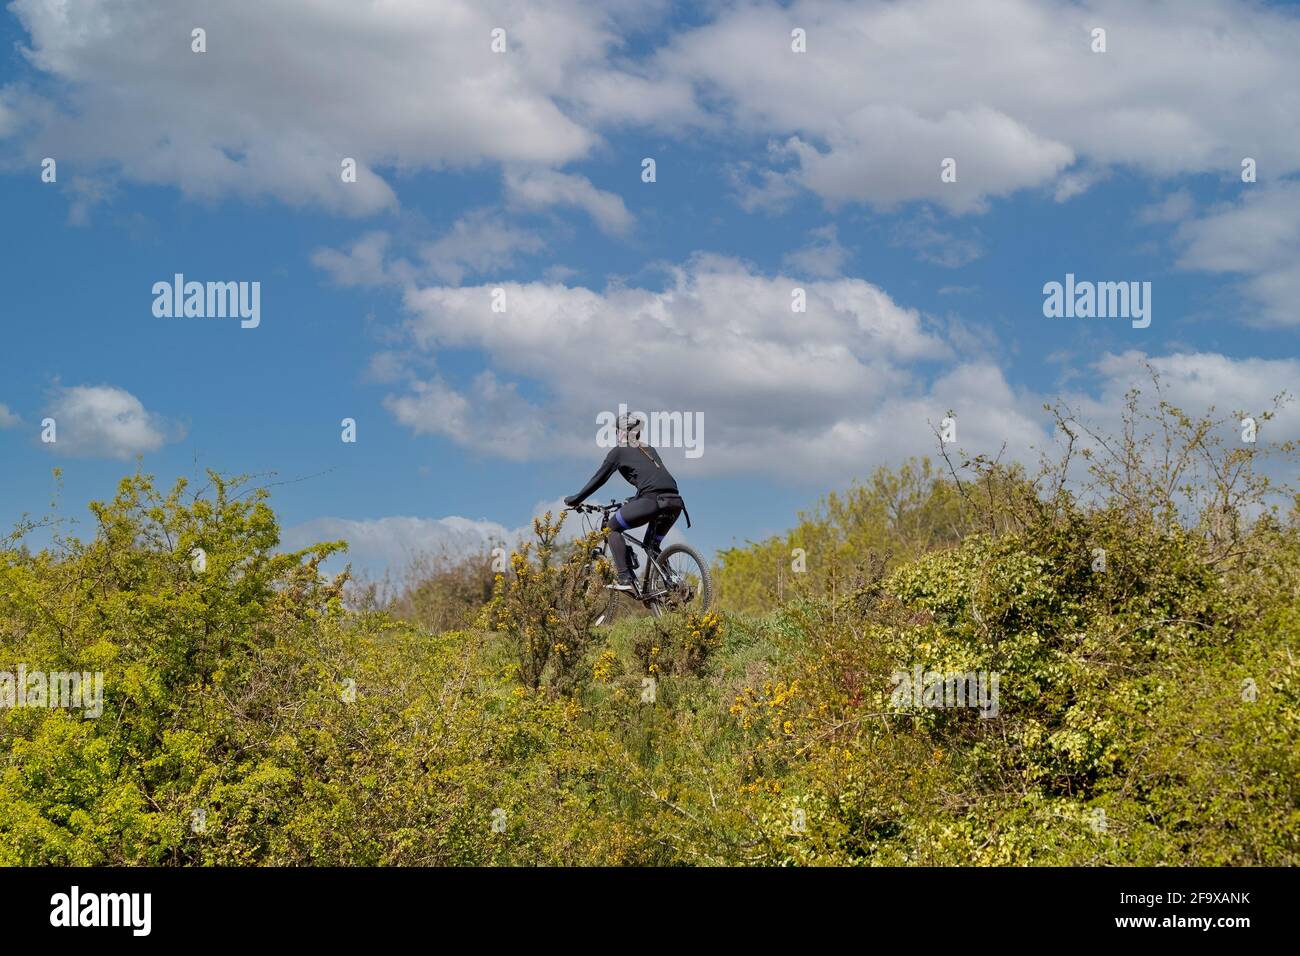 A woman cycling alone in the countryside with a blue sky background Stock Photo